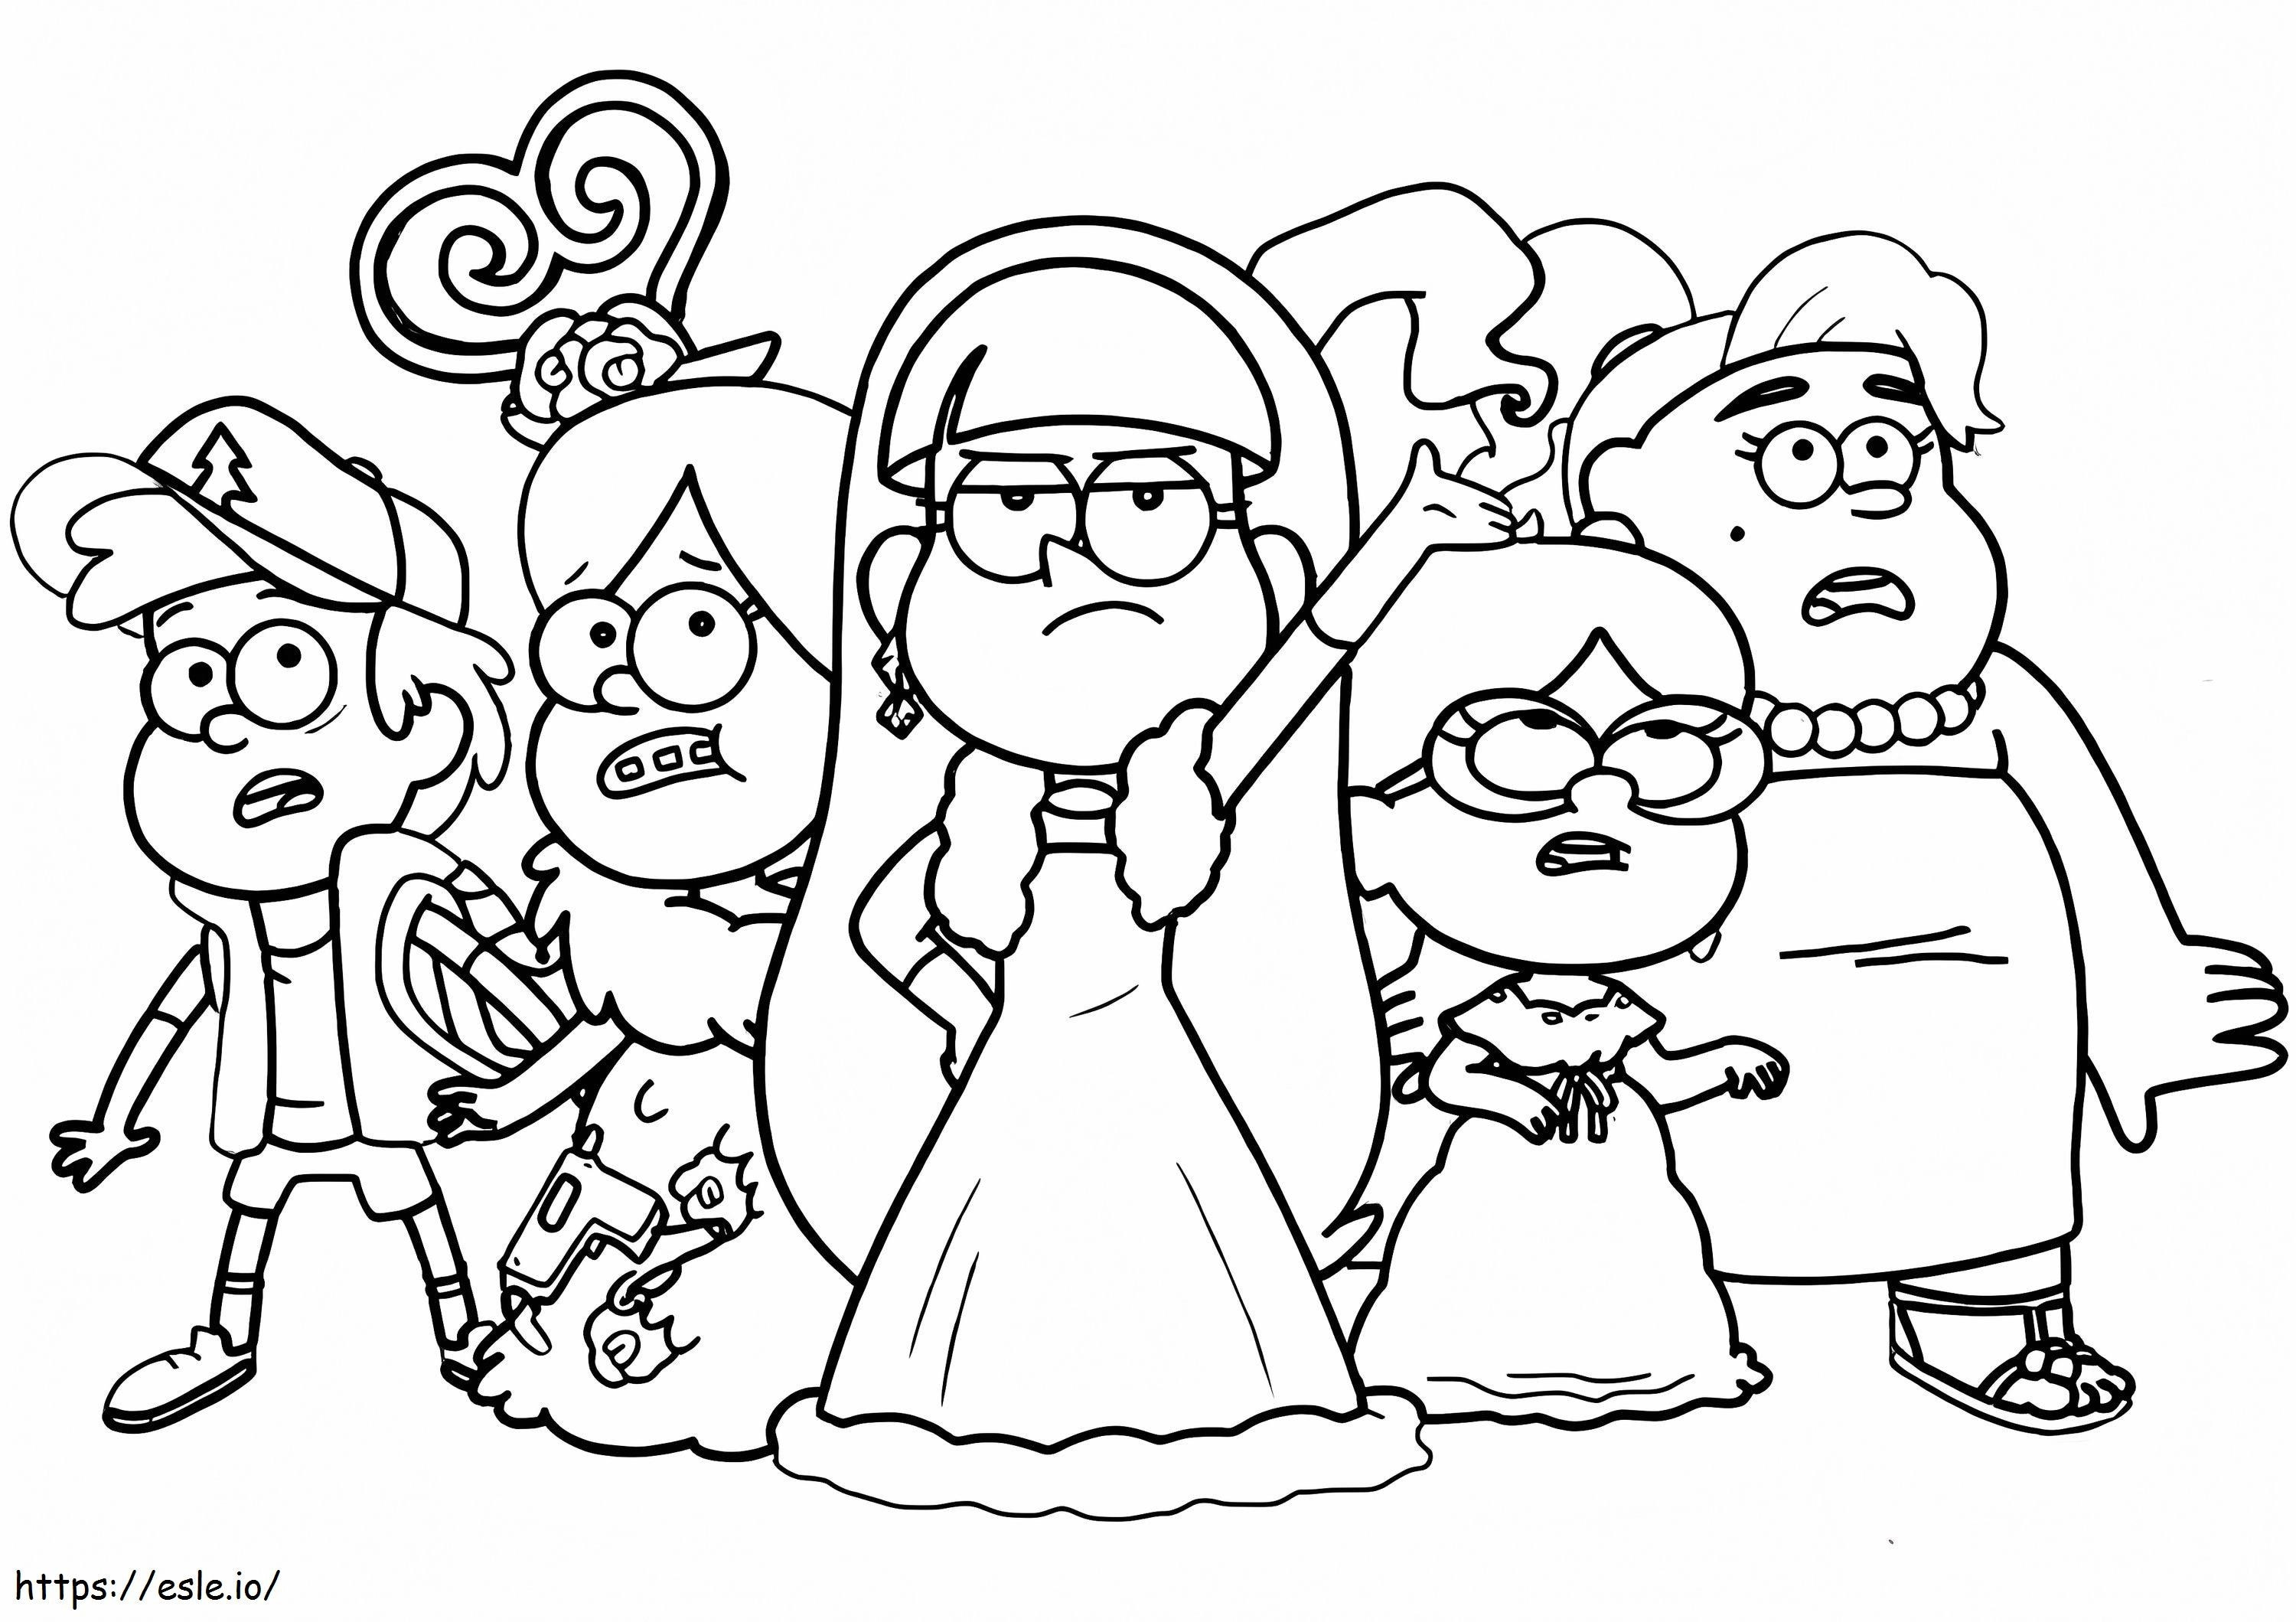 Gravity Falls Friend coloring page